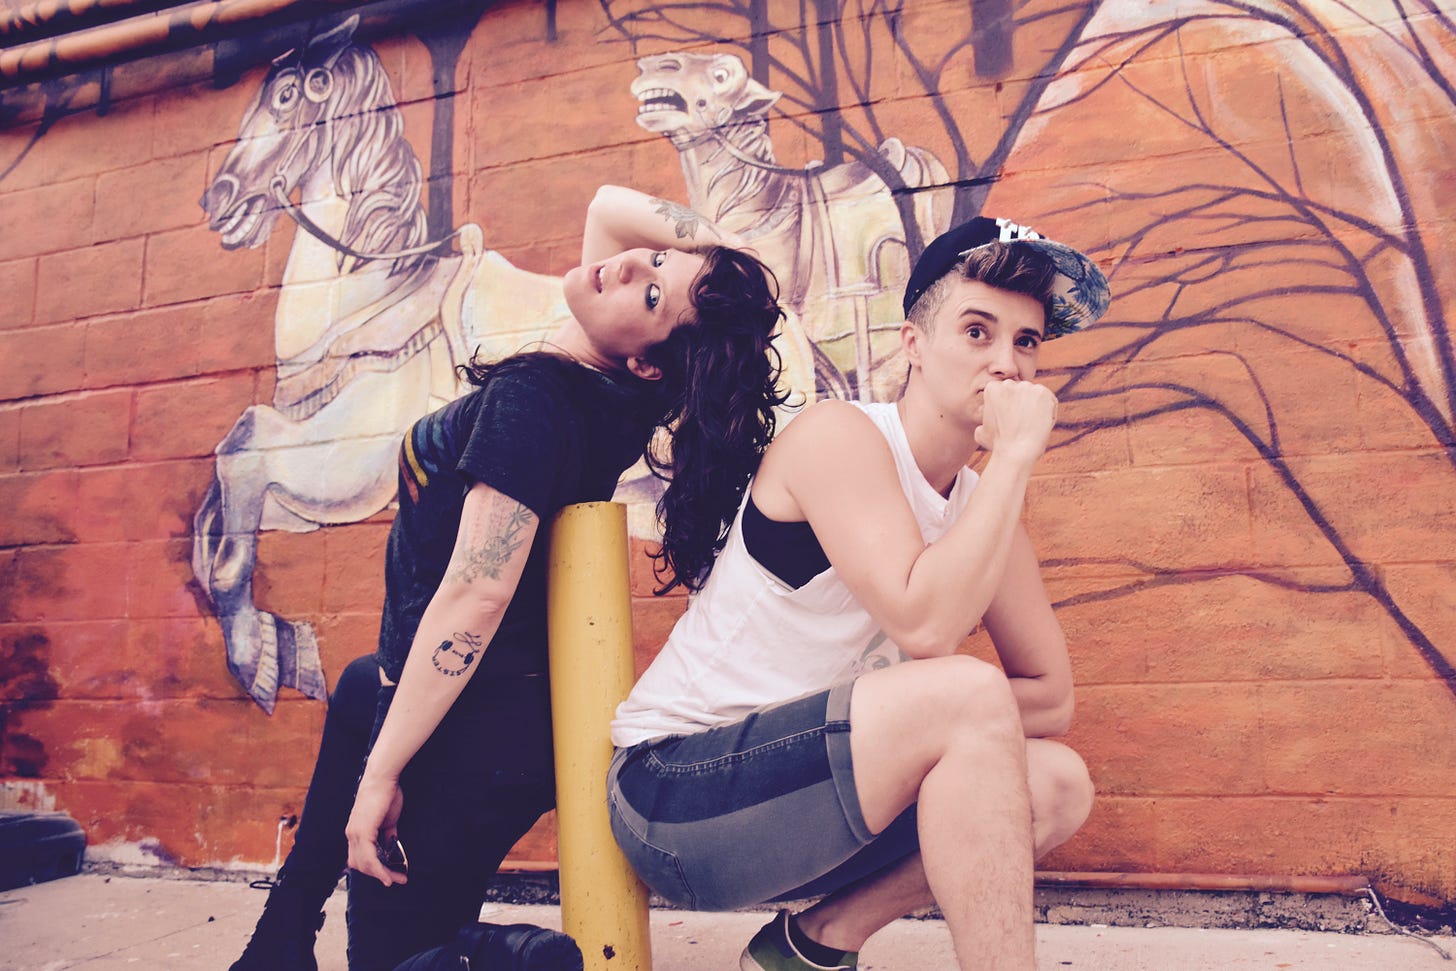 A promo image for the band Damsel Trash shows Emily and Meg in a silly pose in front of a colorful mural.